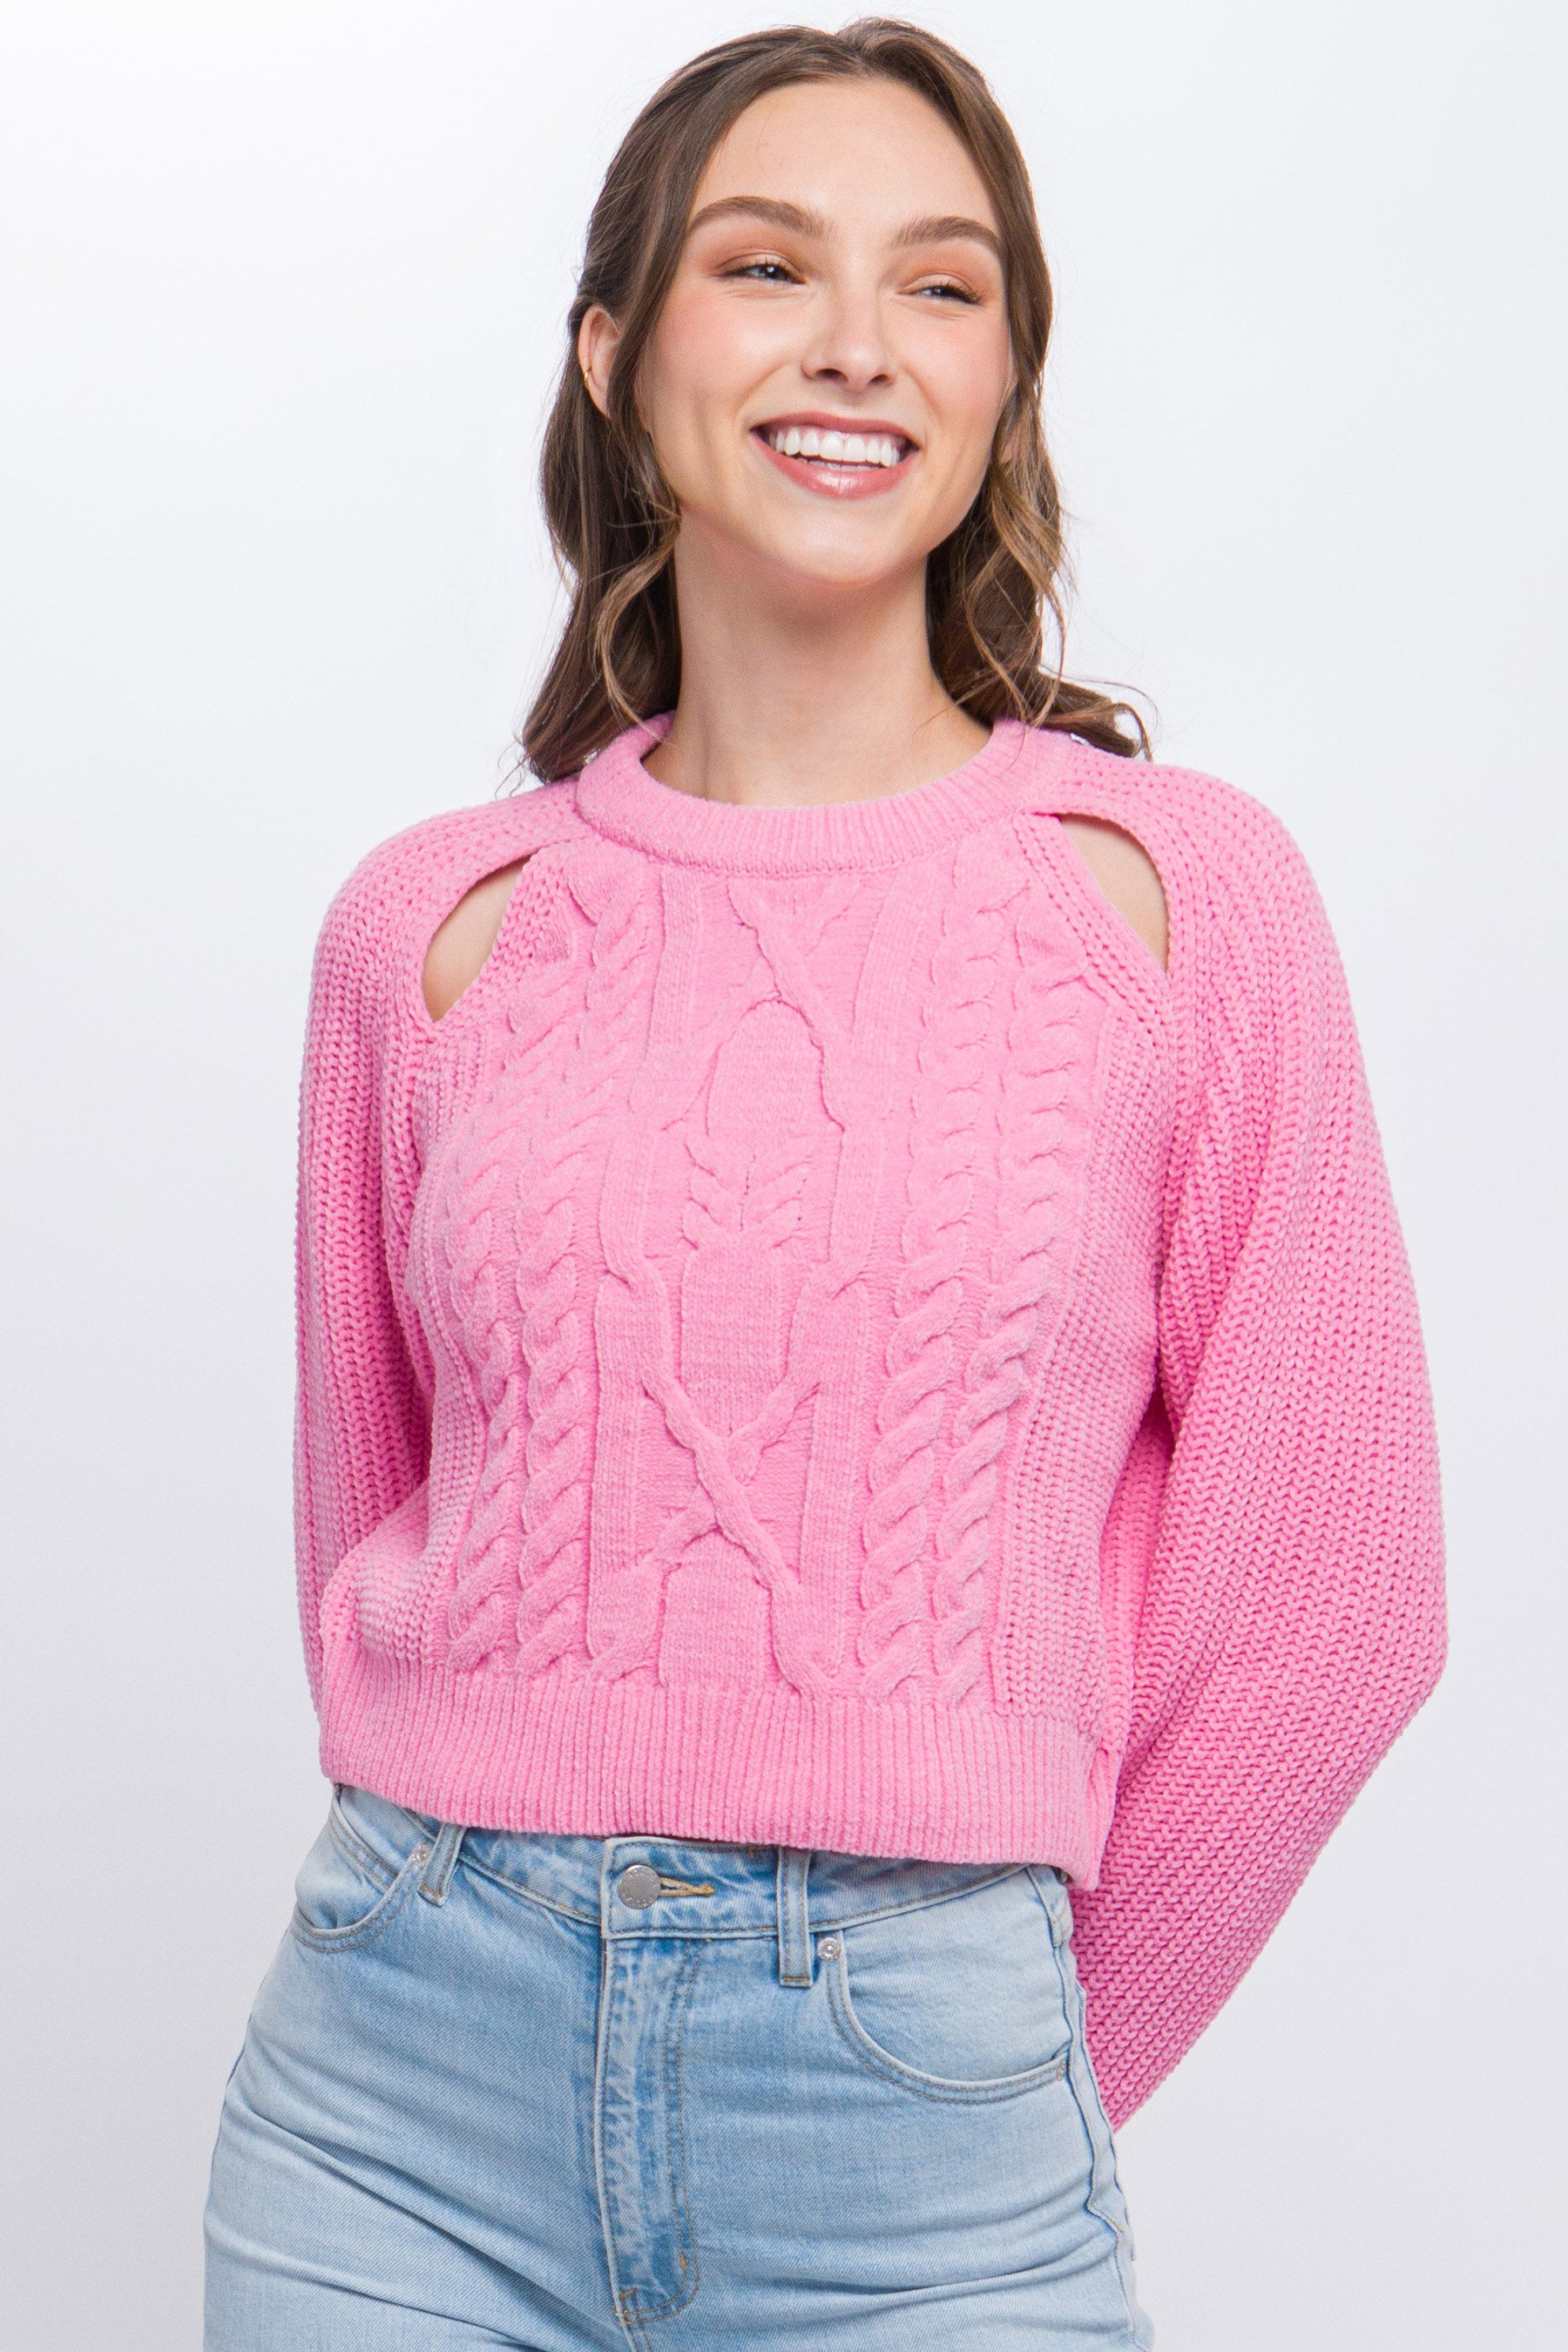 Knit Pullover Sweater With Cold Shoulder Detail.